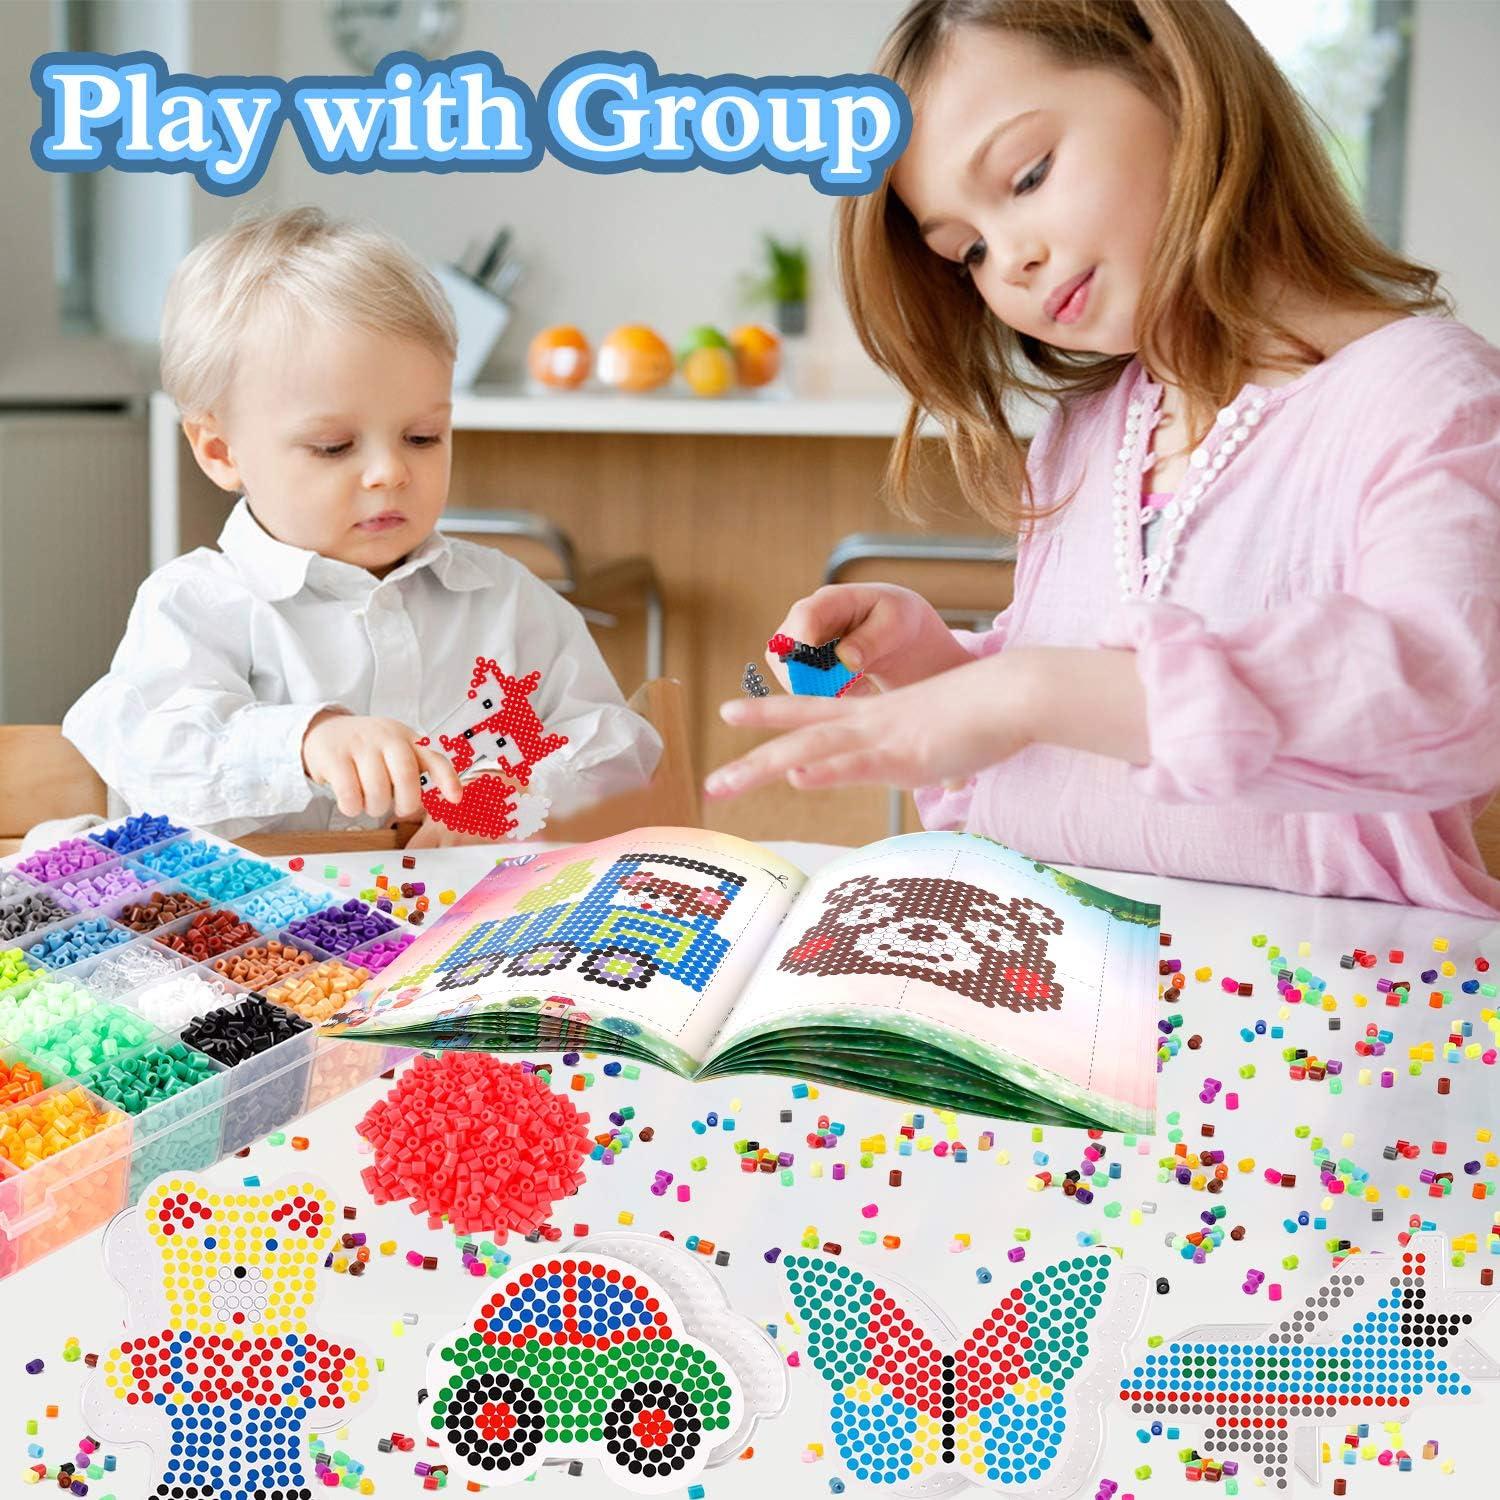 Bachmore Fuse Beads Craft Kit Melty Fusion Colored Beads- 12,000pcs 38  Colors Pearler Craft Sets for Kids Including 7 Pegboards,Booklet Chain  Accessories Activity Gift Toy For Boys and Girls Age 5 6 7 Large